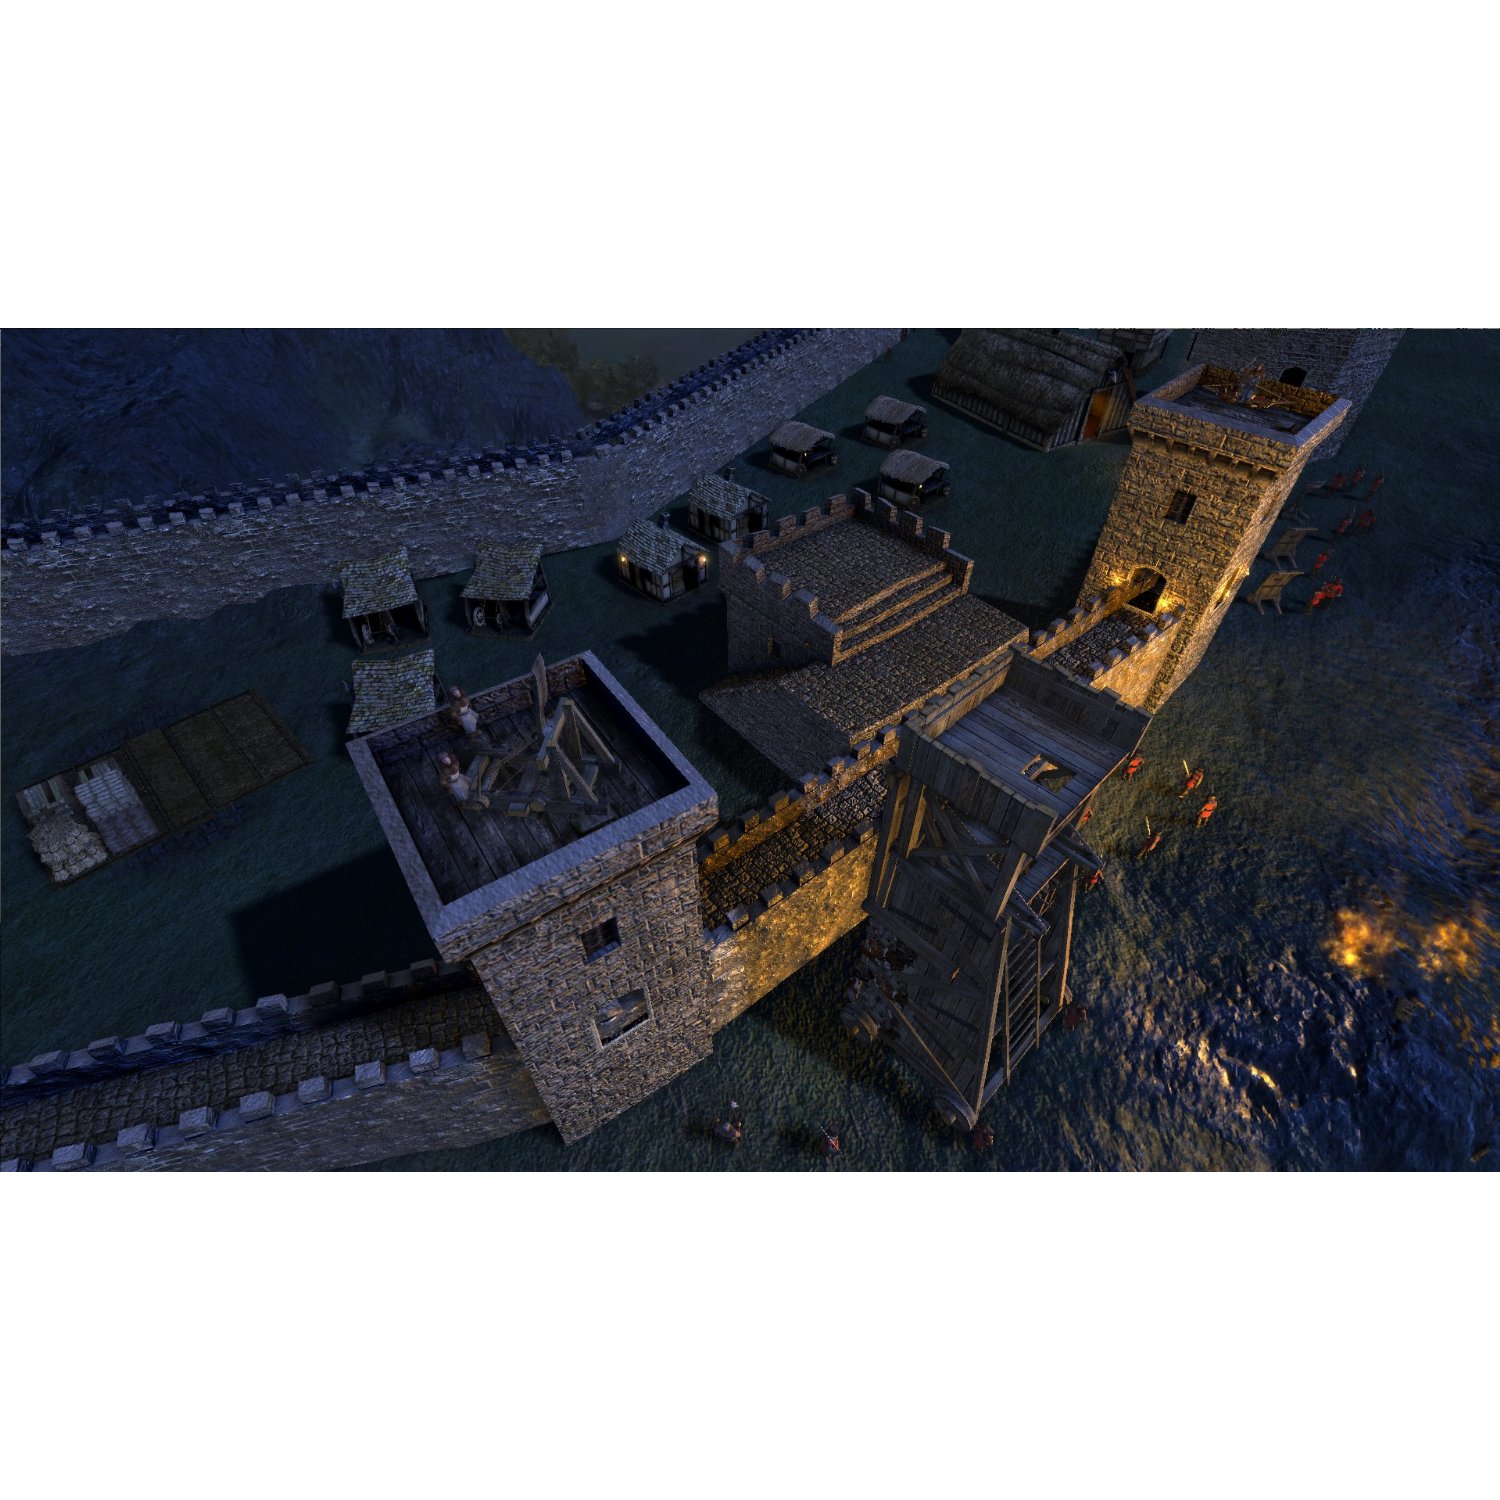 http://thetechjournal.com/wp-content/uploads/images/1110/1319511406-stronghold-3--pc-game-available-from-today-at-amazon-6.jpg